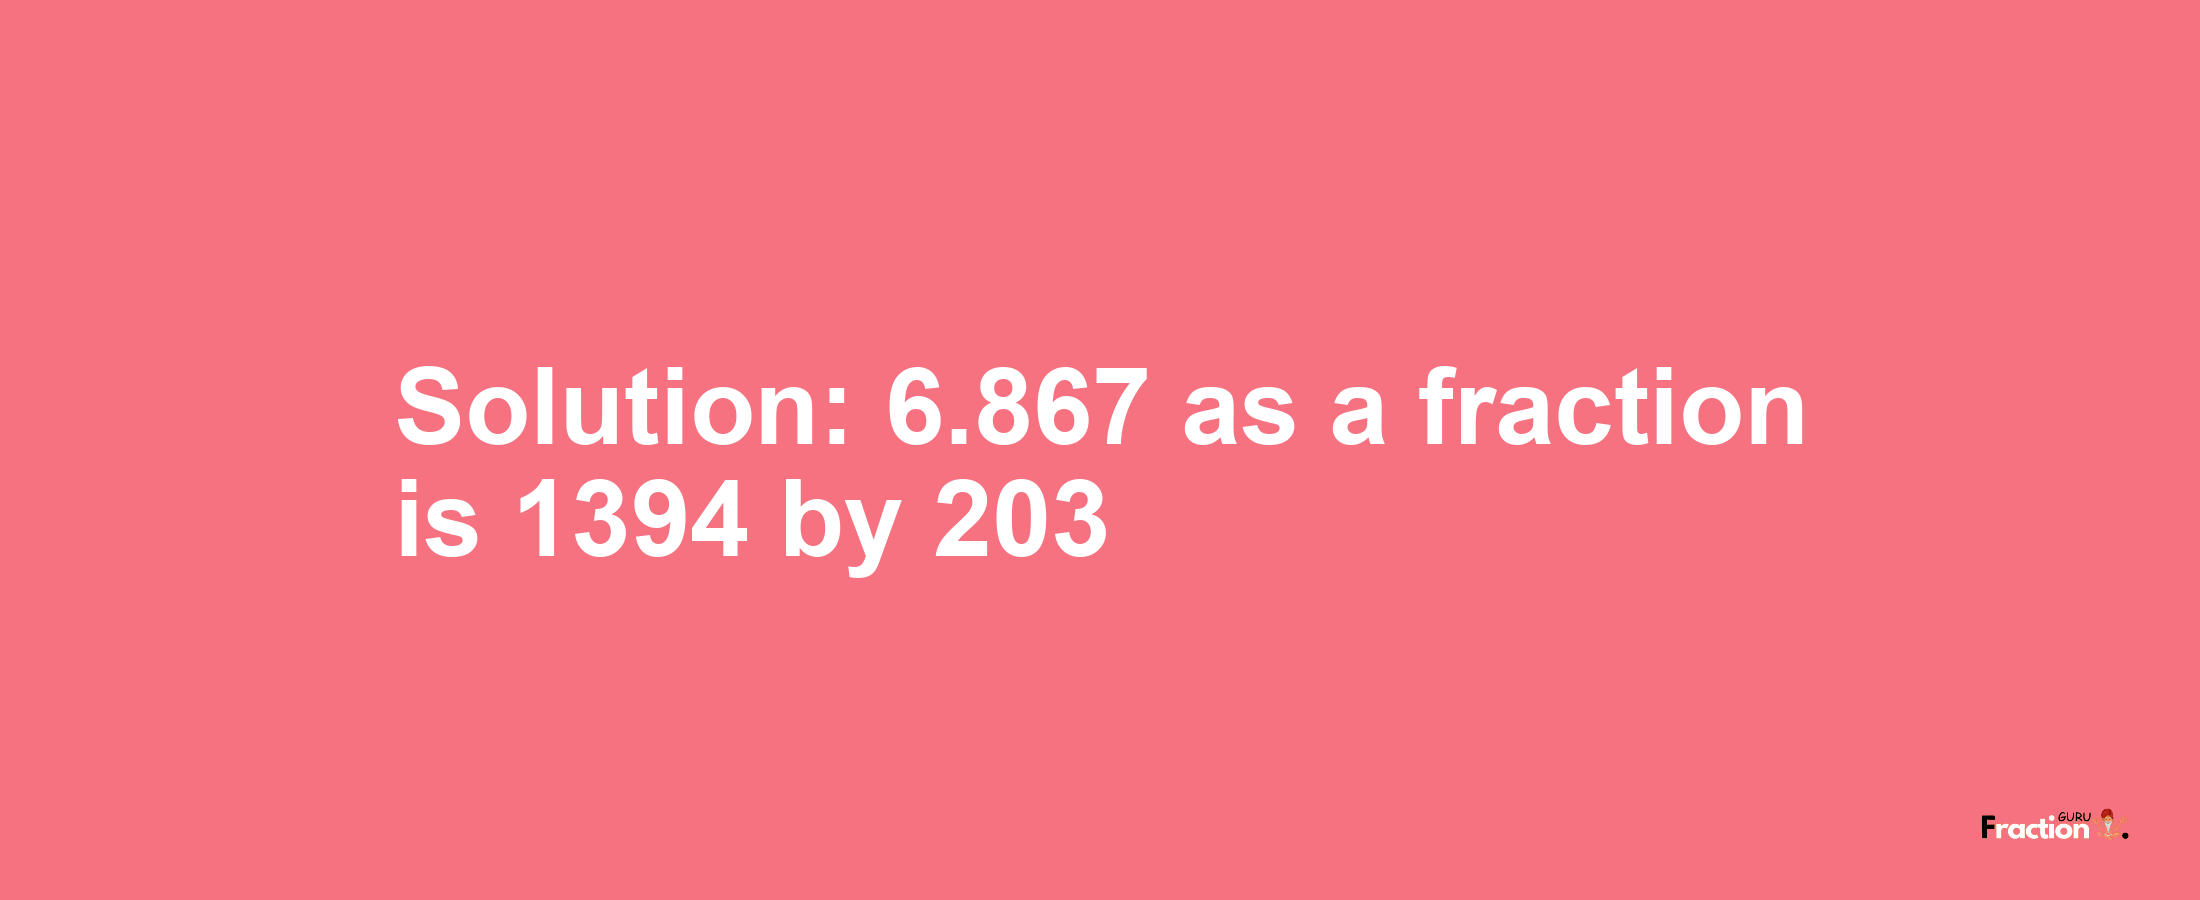 Solution:6.867 as a fraction is 1394/203